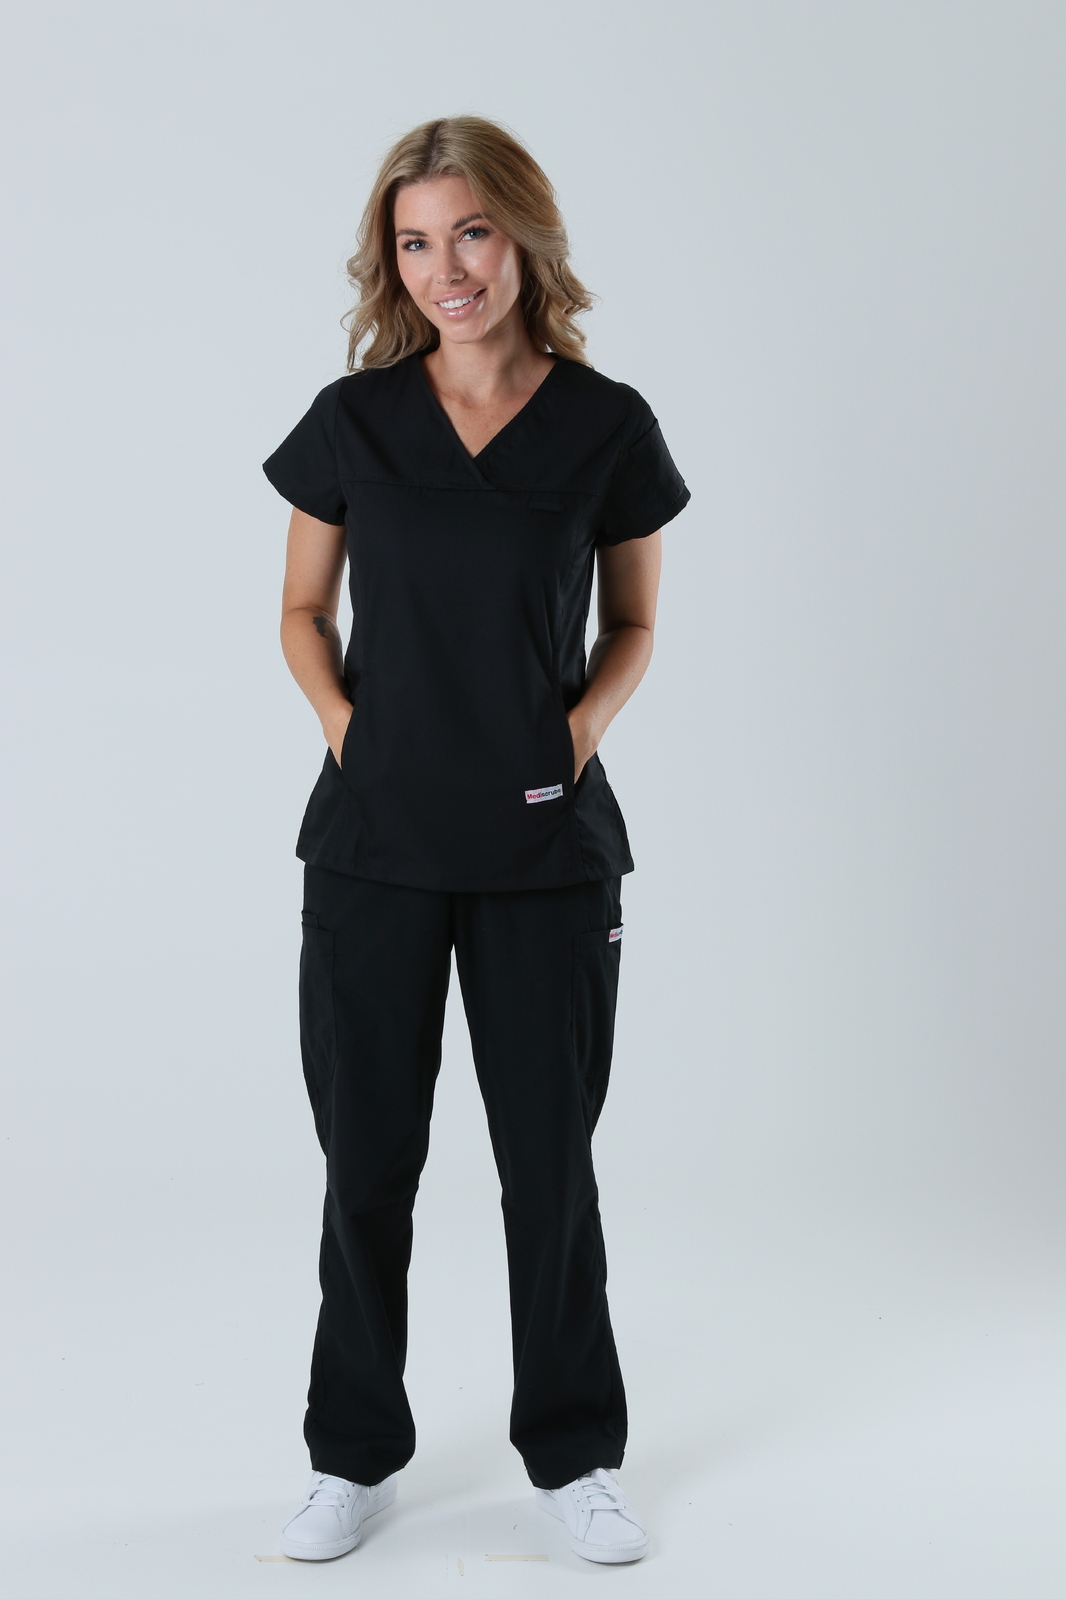 Canberra Hospital Medical Imaging Nuclear Medicine Uniform Set Bundle (Wome'ns Fit Solid Top and Cargo Pants in Black + Logos)